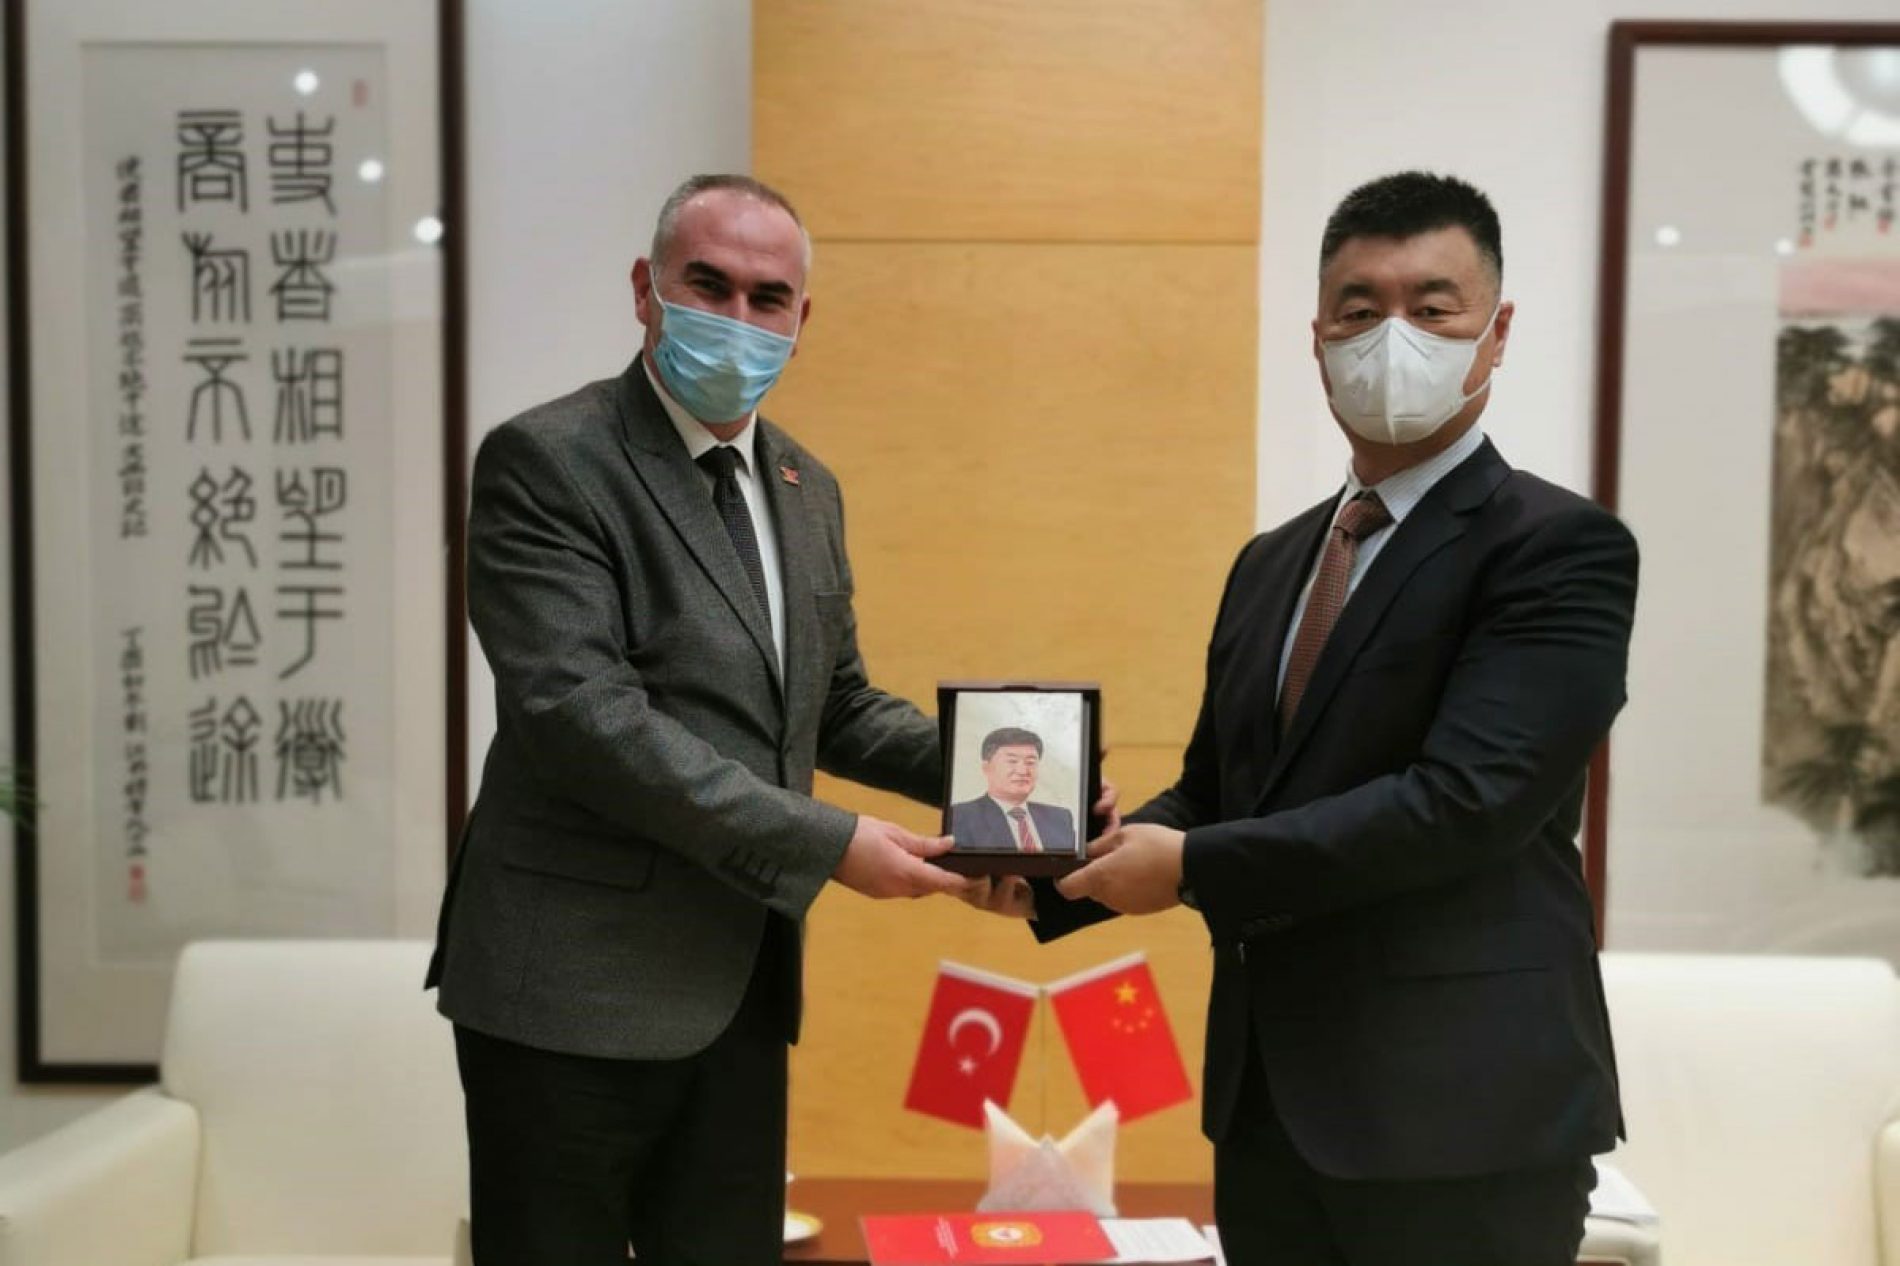 Our Board Chairman, Mr. İhsan BEŞER, visited Dr. LIU Yuhu, the Undersecretary of Economy and Trade of the People’s Republic of China’s Embassy in Ankara